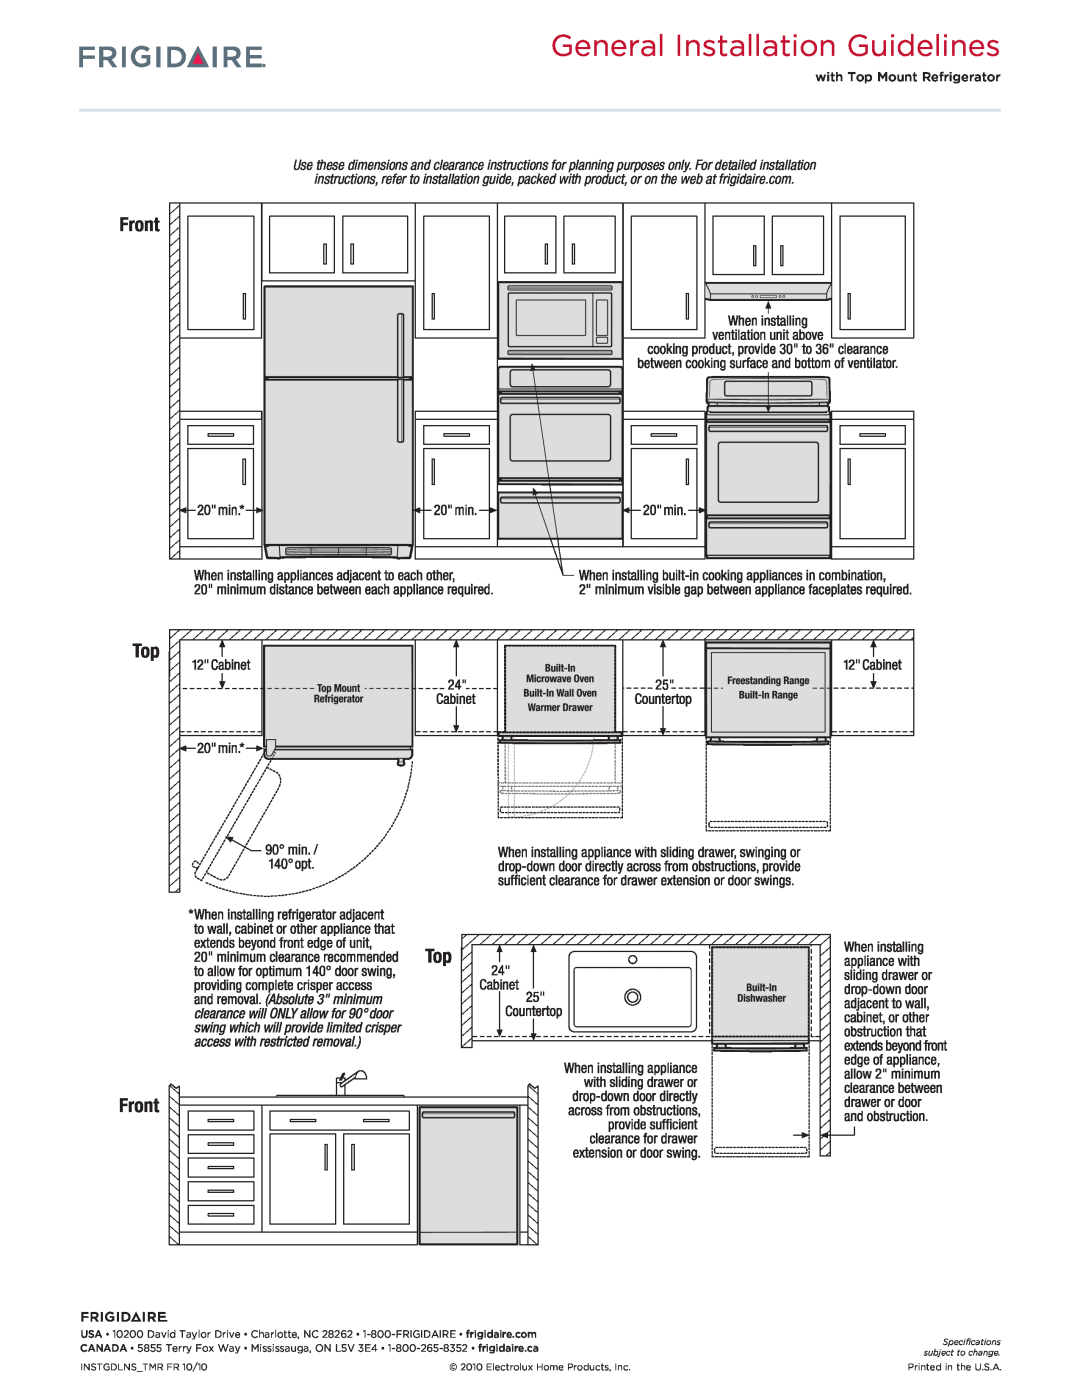 Frigidaire FGET3045K F/W/B General Installation Guidelines, Top Front, with Top Mount Refrigerator, INSTGDLNS TMR FR 10/10 